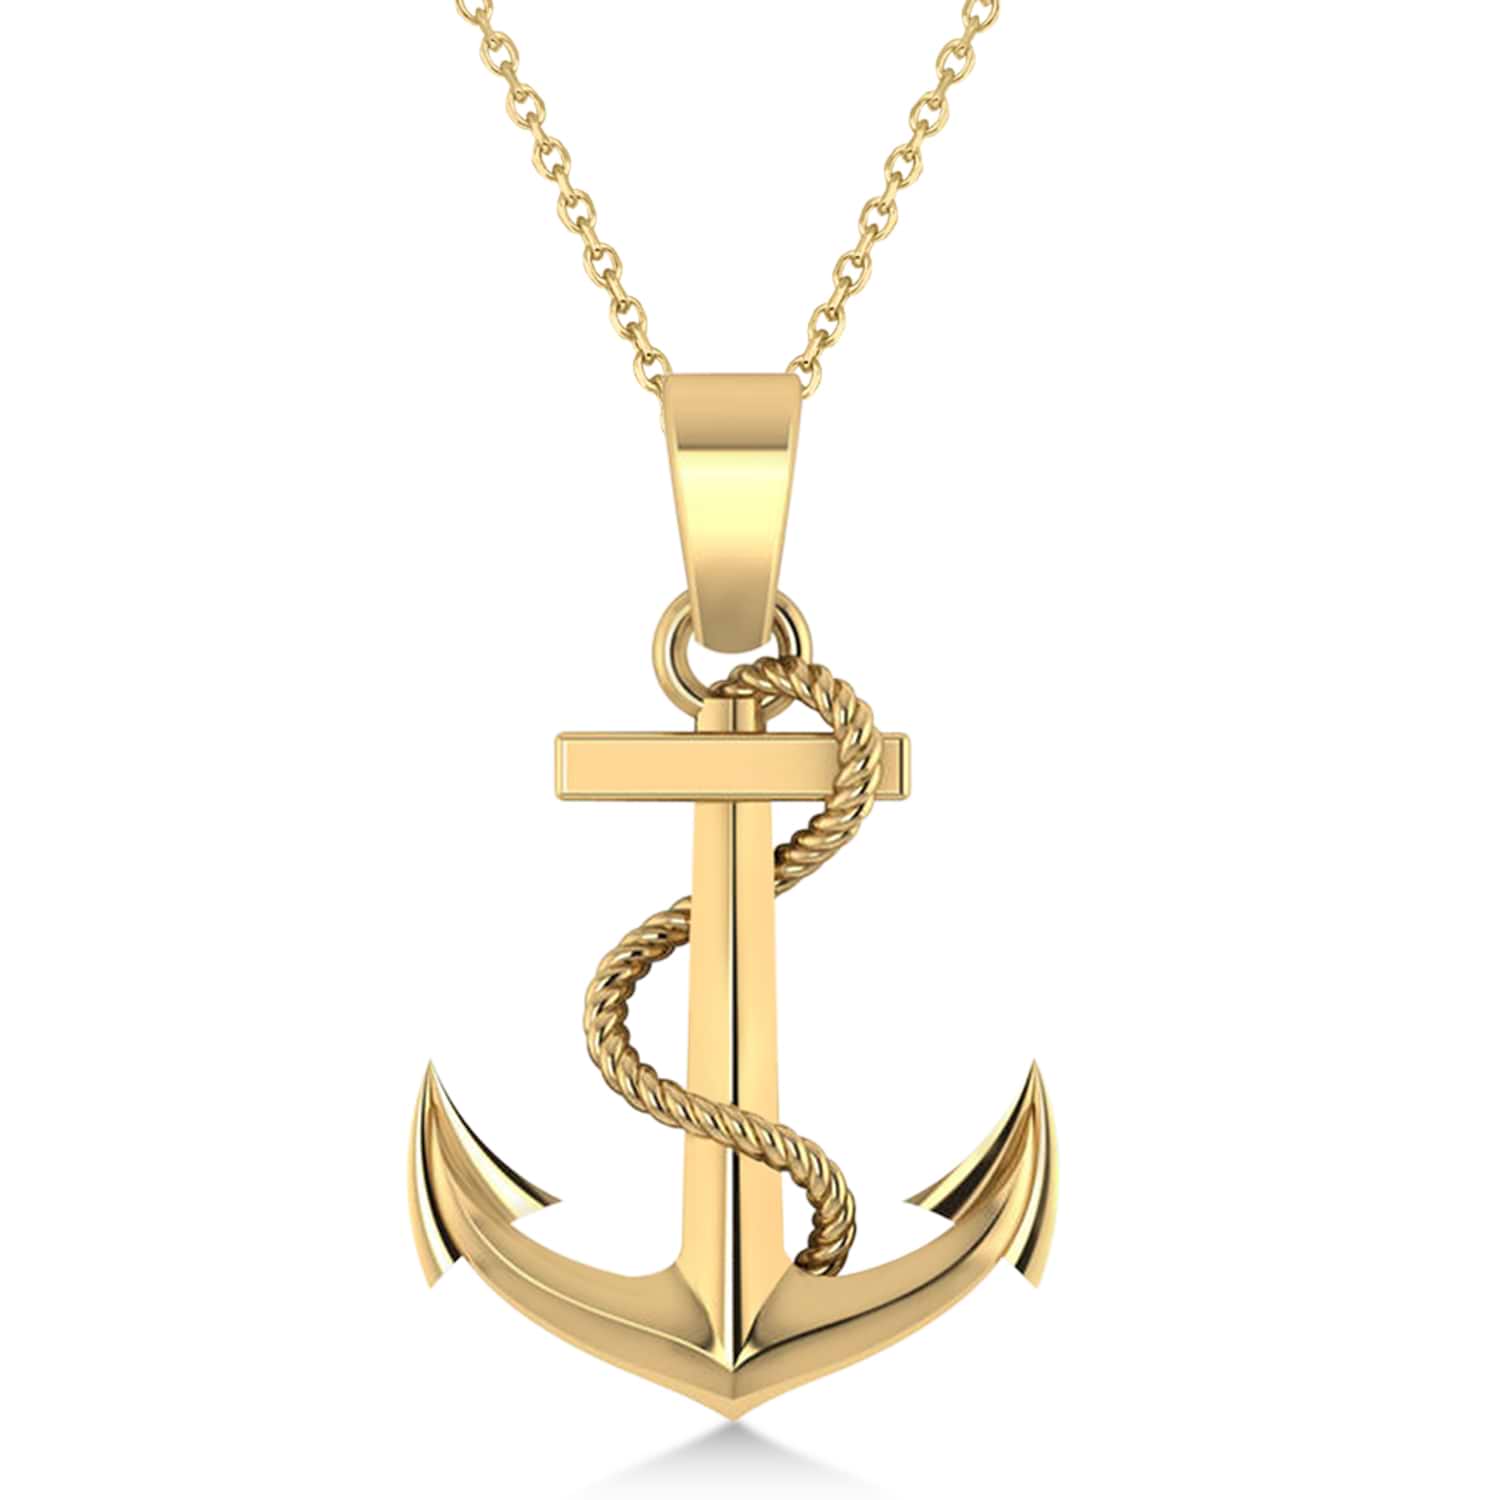 MENDEL Mens Womens Gold Plated Anchor Pendant Necklace Chain Men Stainless  Steel | eBay